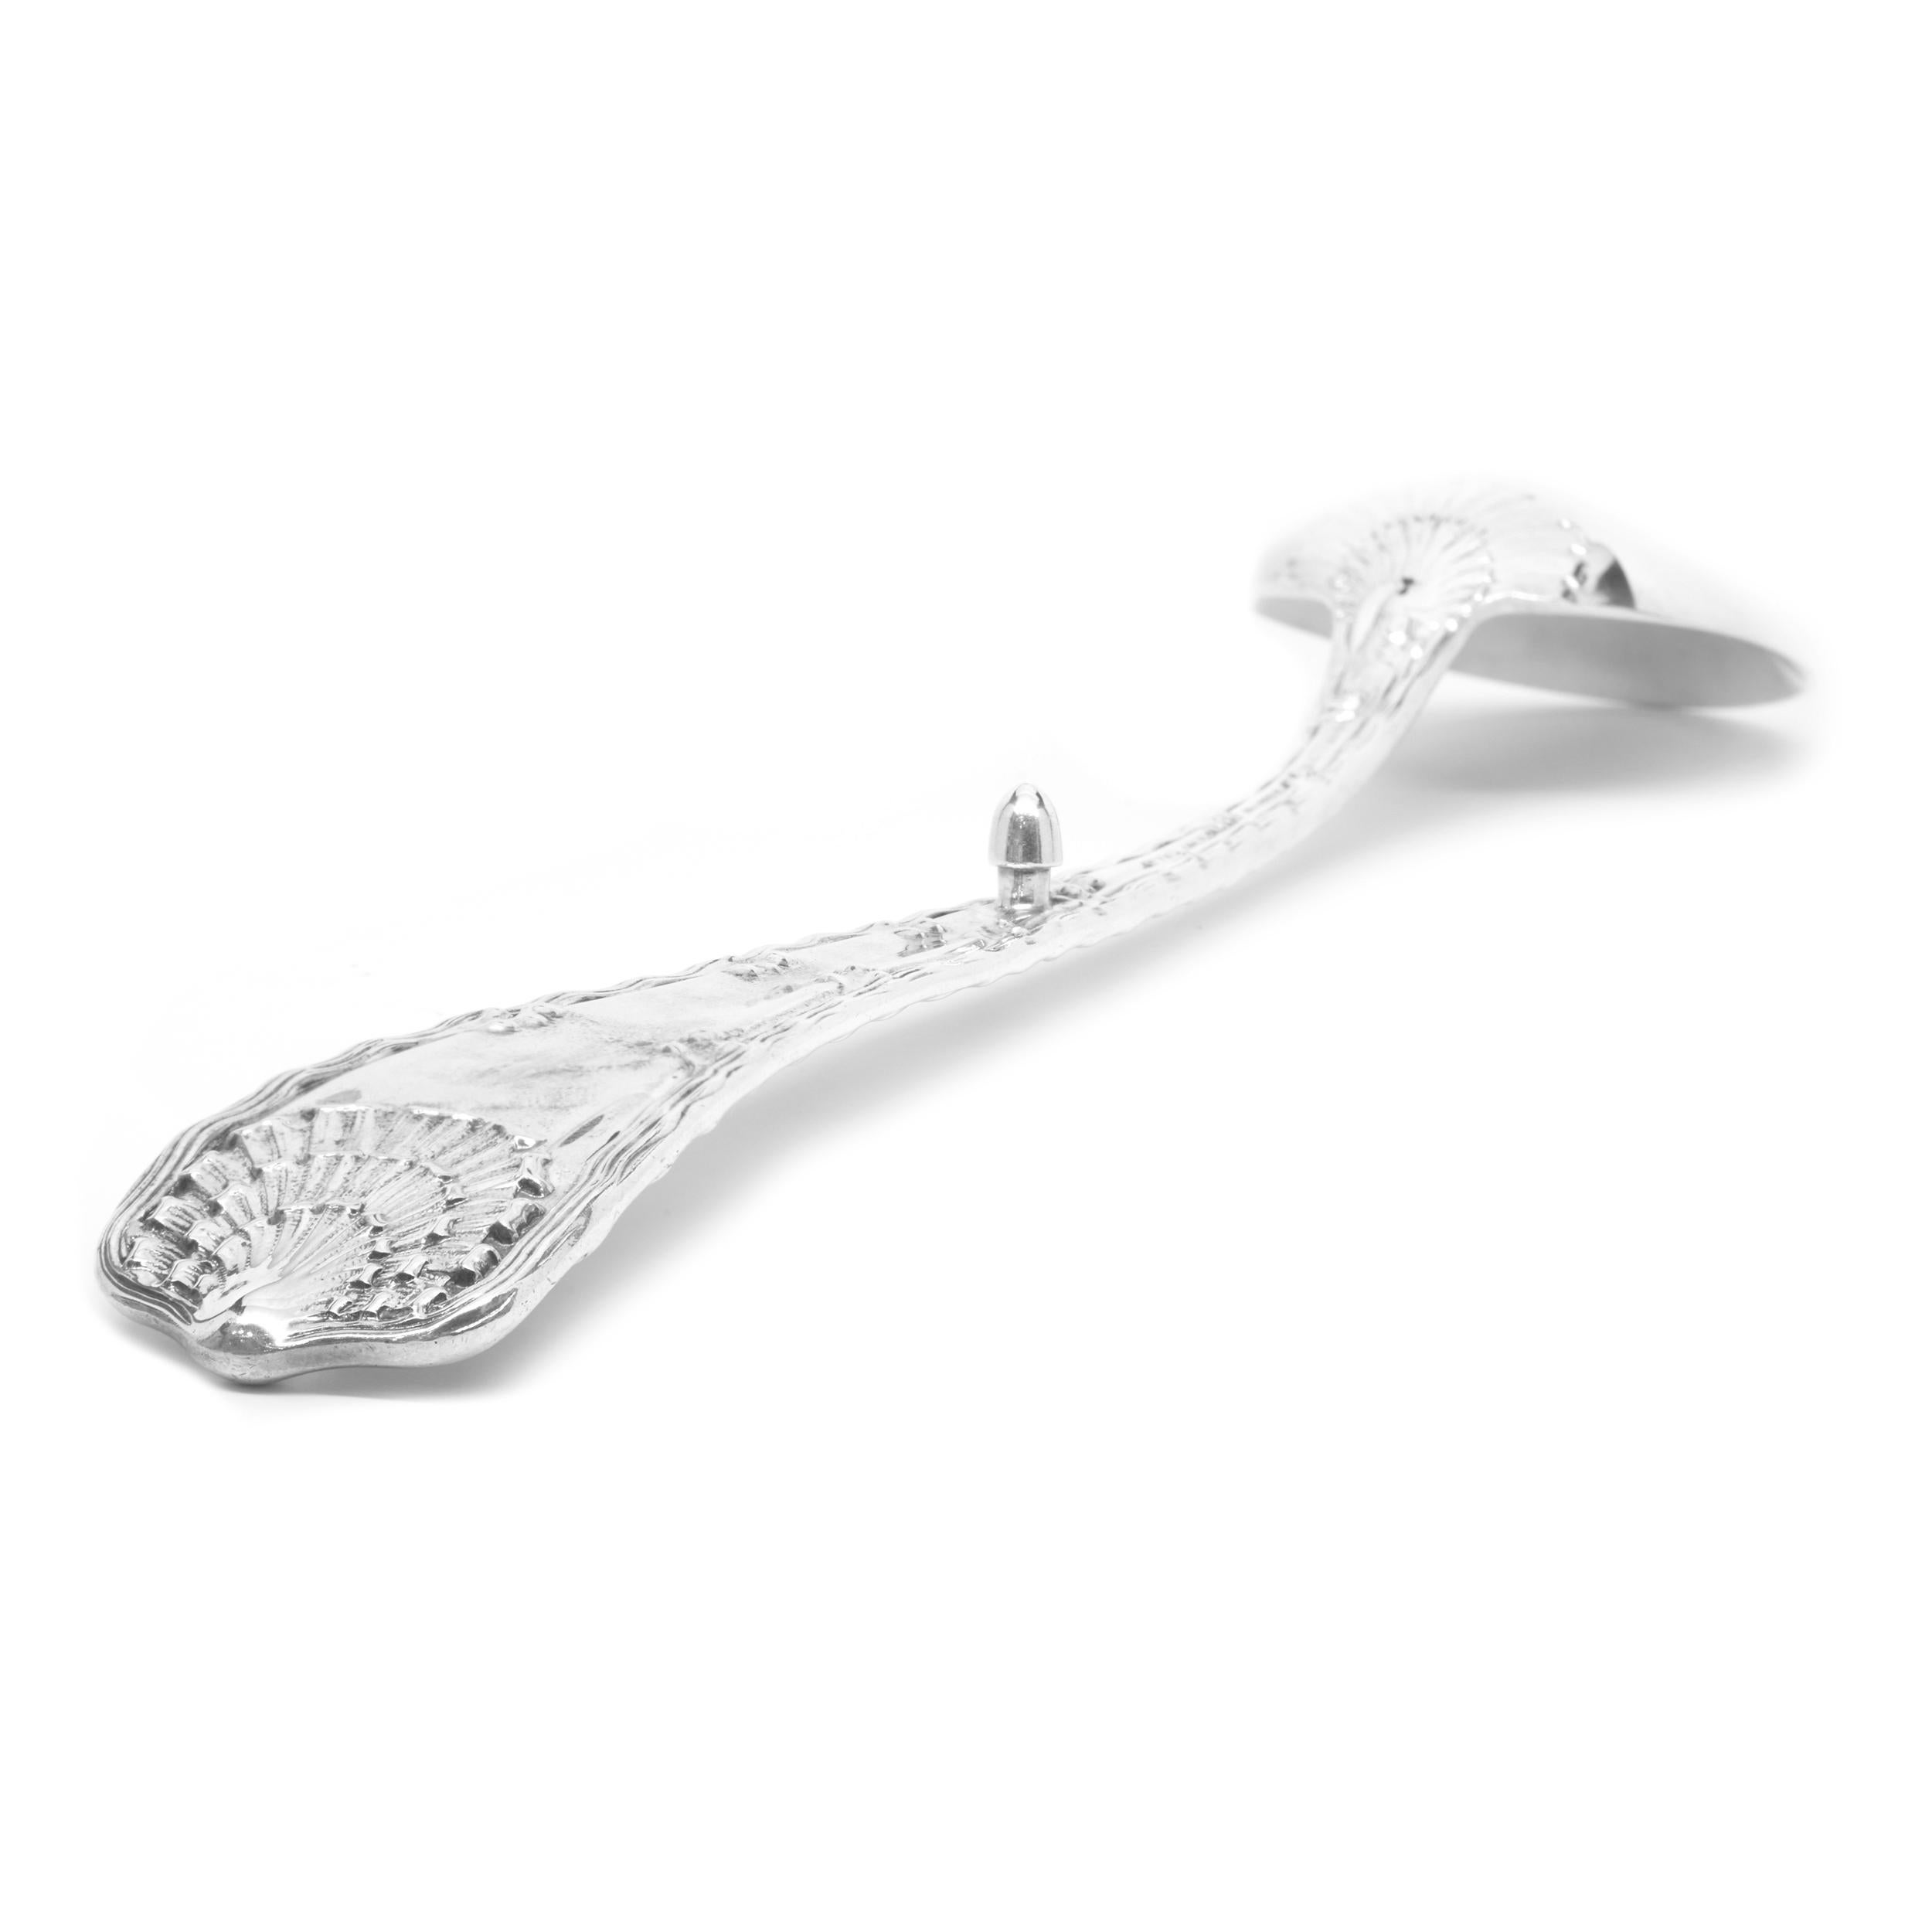 Designer: Tiffany & Co. 
Material: sterling silver
Dimensions: ladle measures 12.5” X 2.25”
Weight: 90 grams
